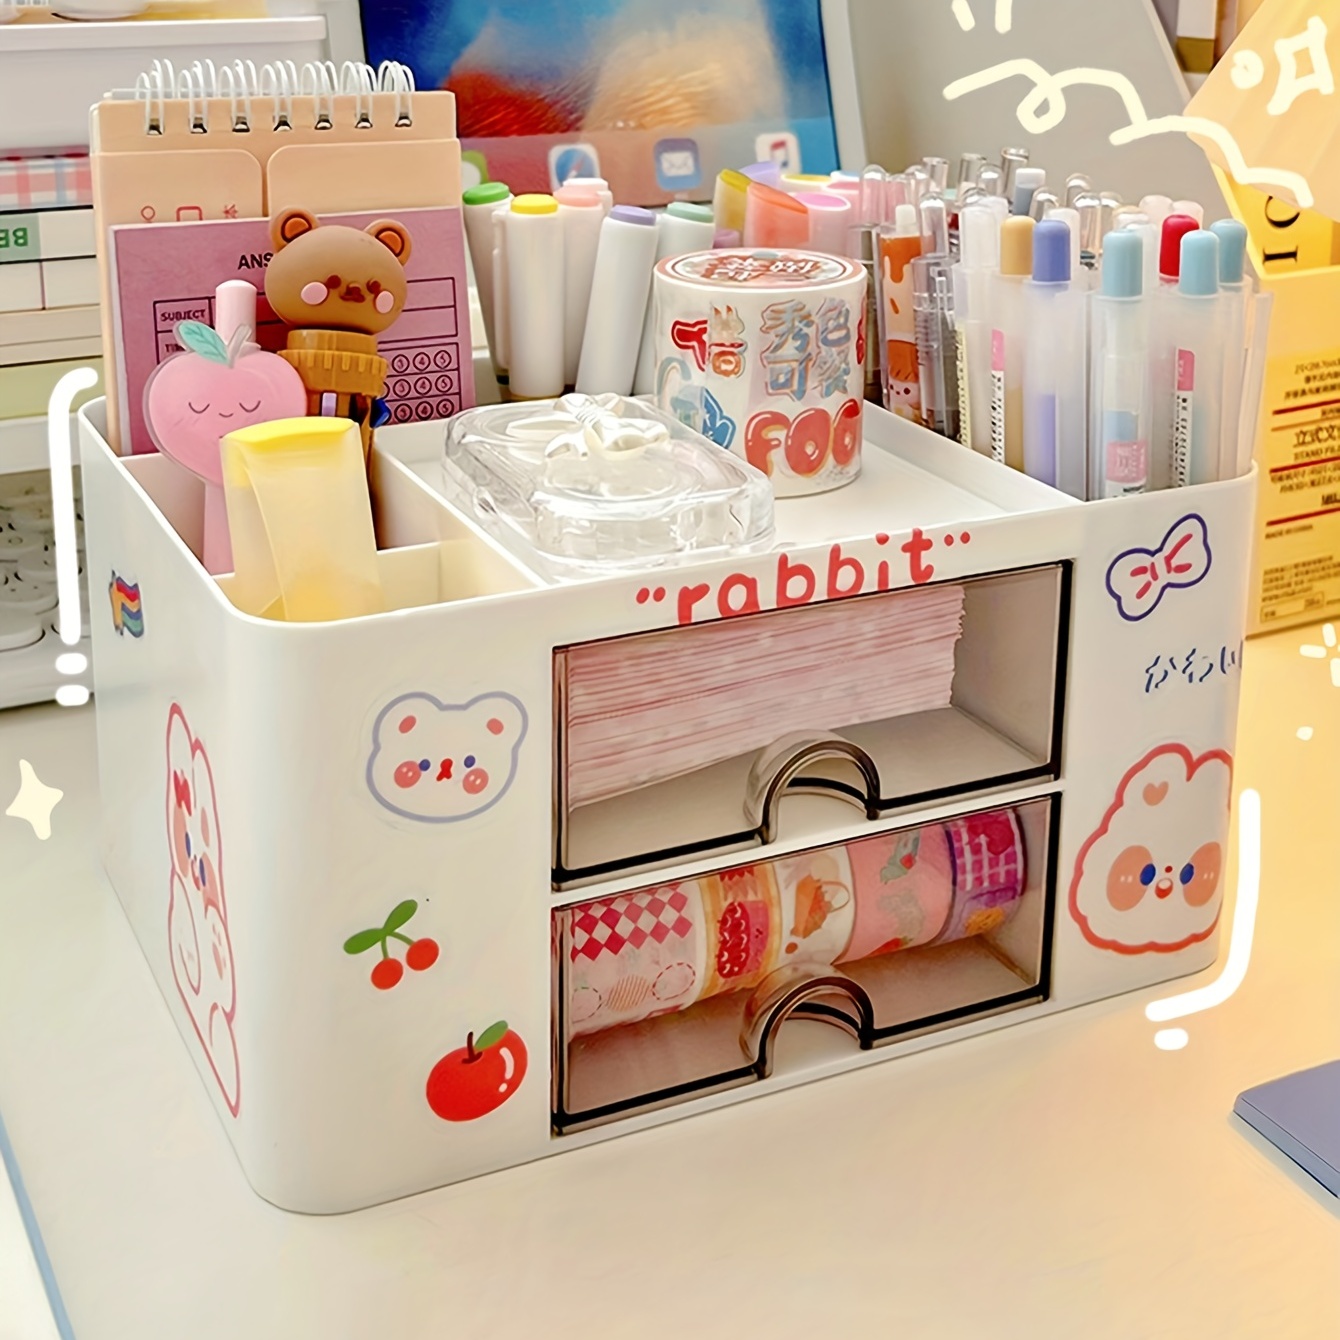  Kawaii Ferris Wheel Rotary Pen Holder with Stickers 6 Grids  Cute Aesthetic Stationery Organizer for Desk Teen Girls Kawaii Room Stuff  Back to School Storage and Organization Supplies (Pink) : Office